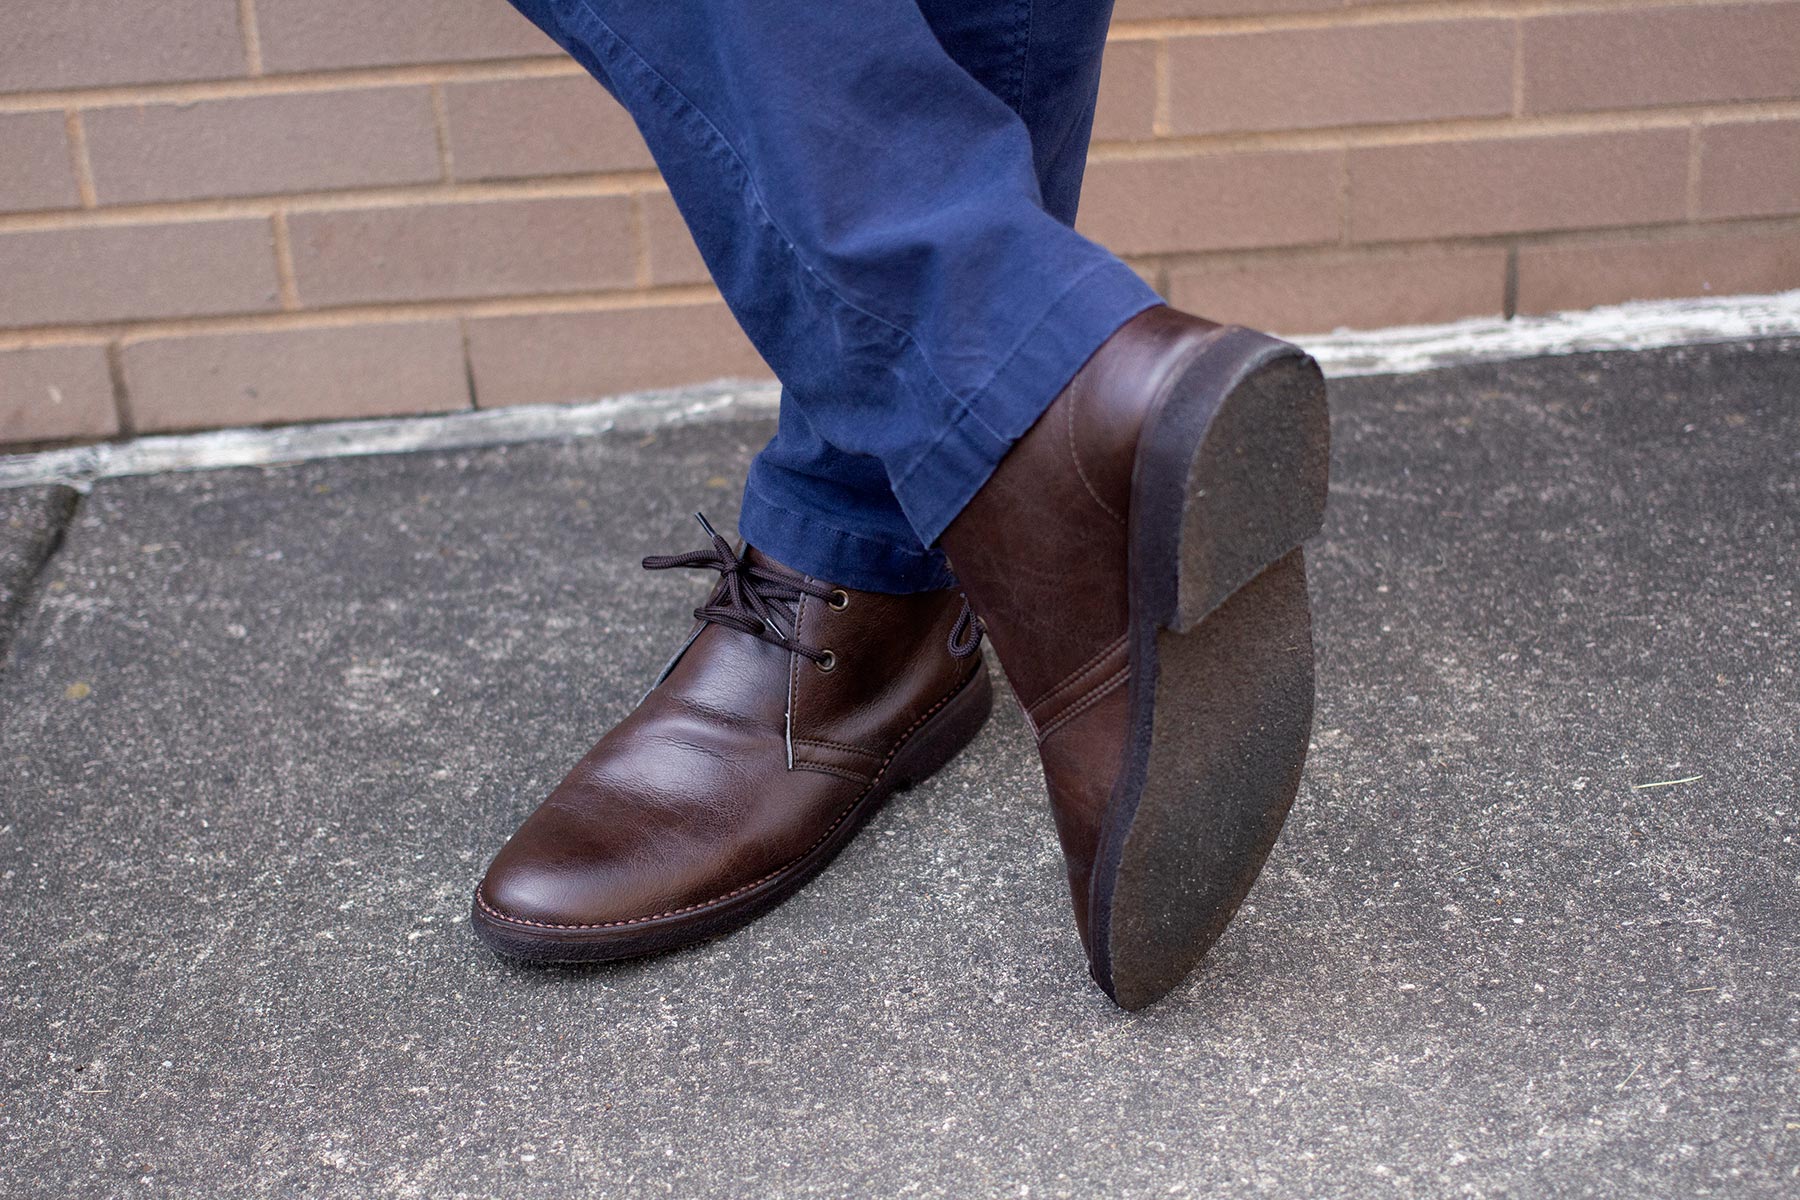 Can You Wear Boots in Spring? TMM's Take - The Modest Man